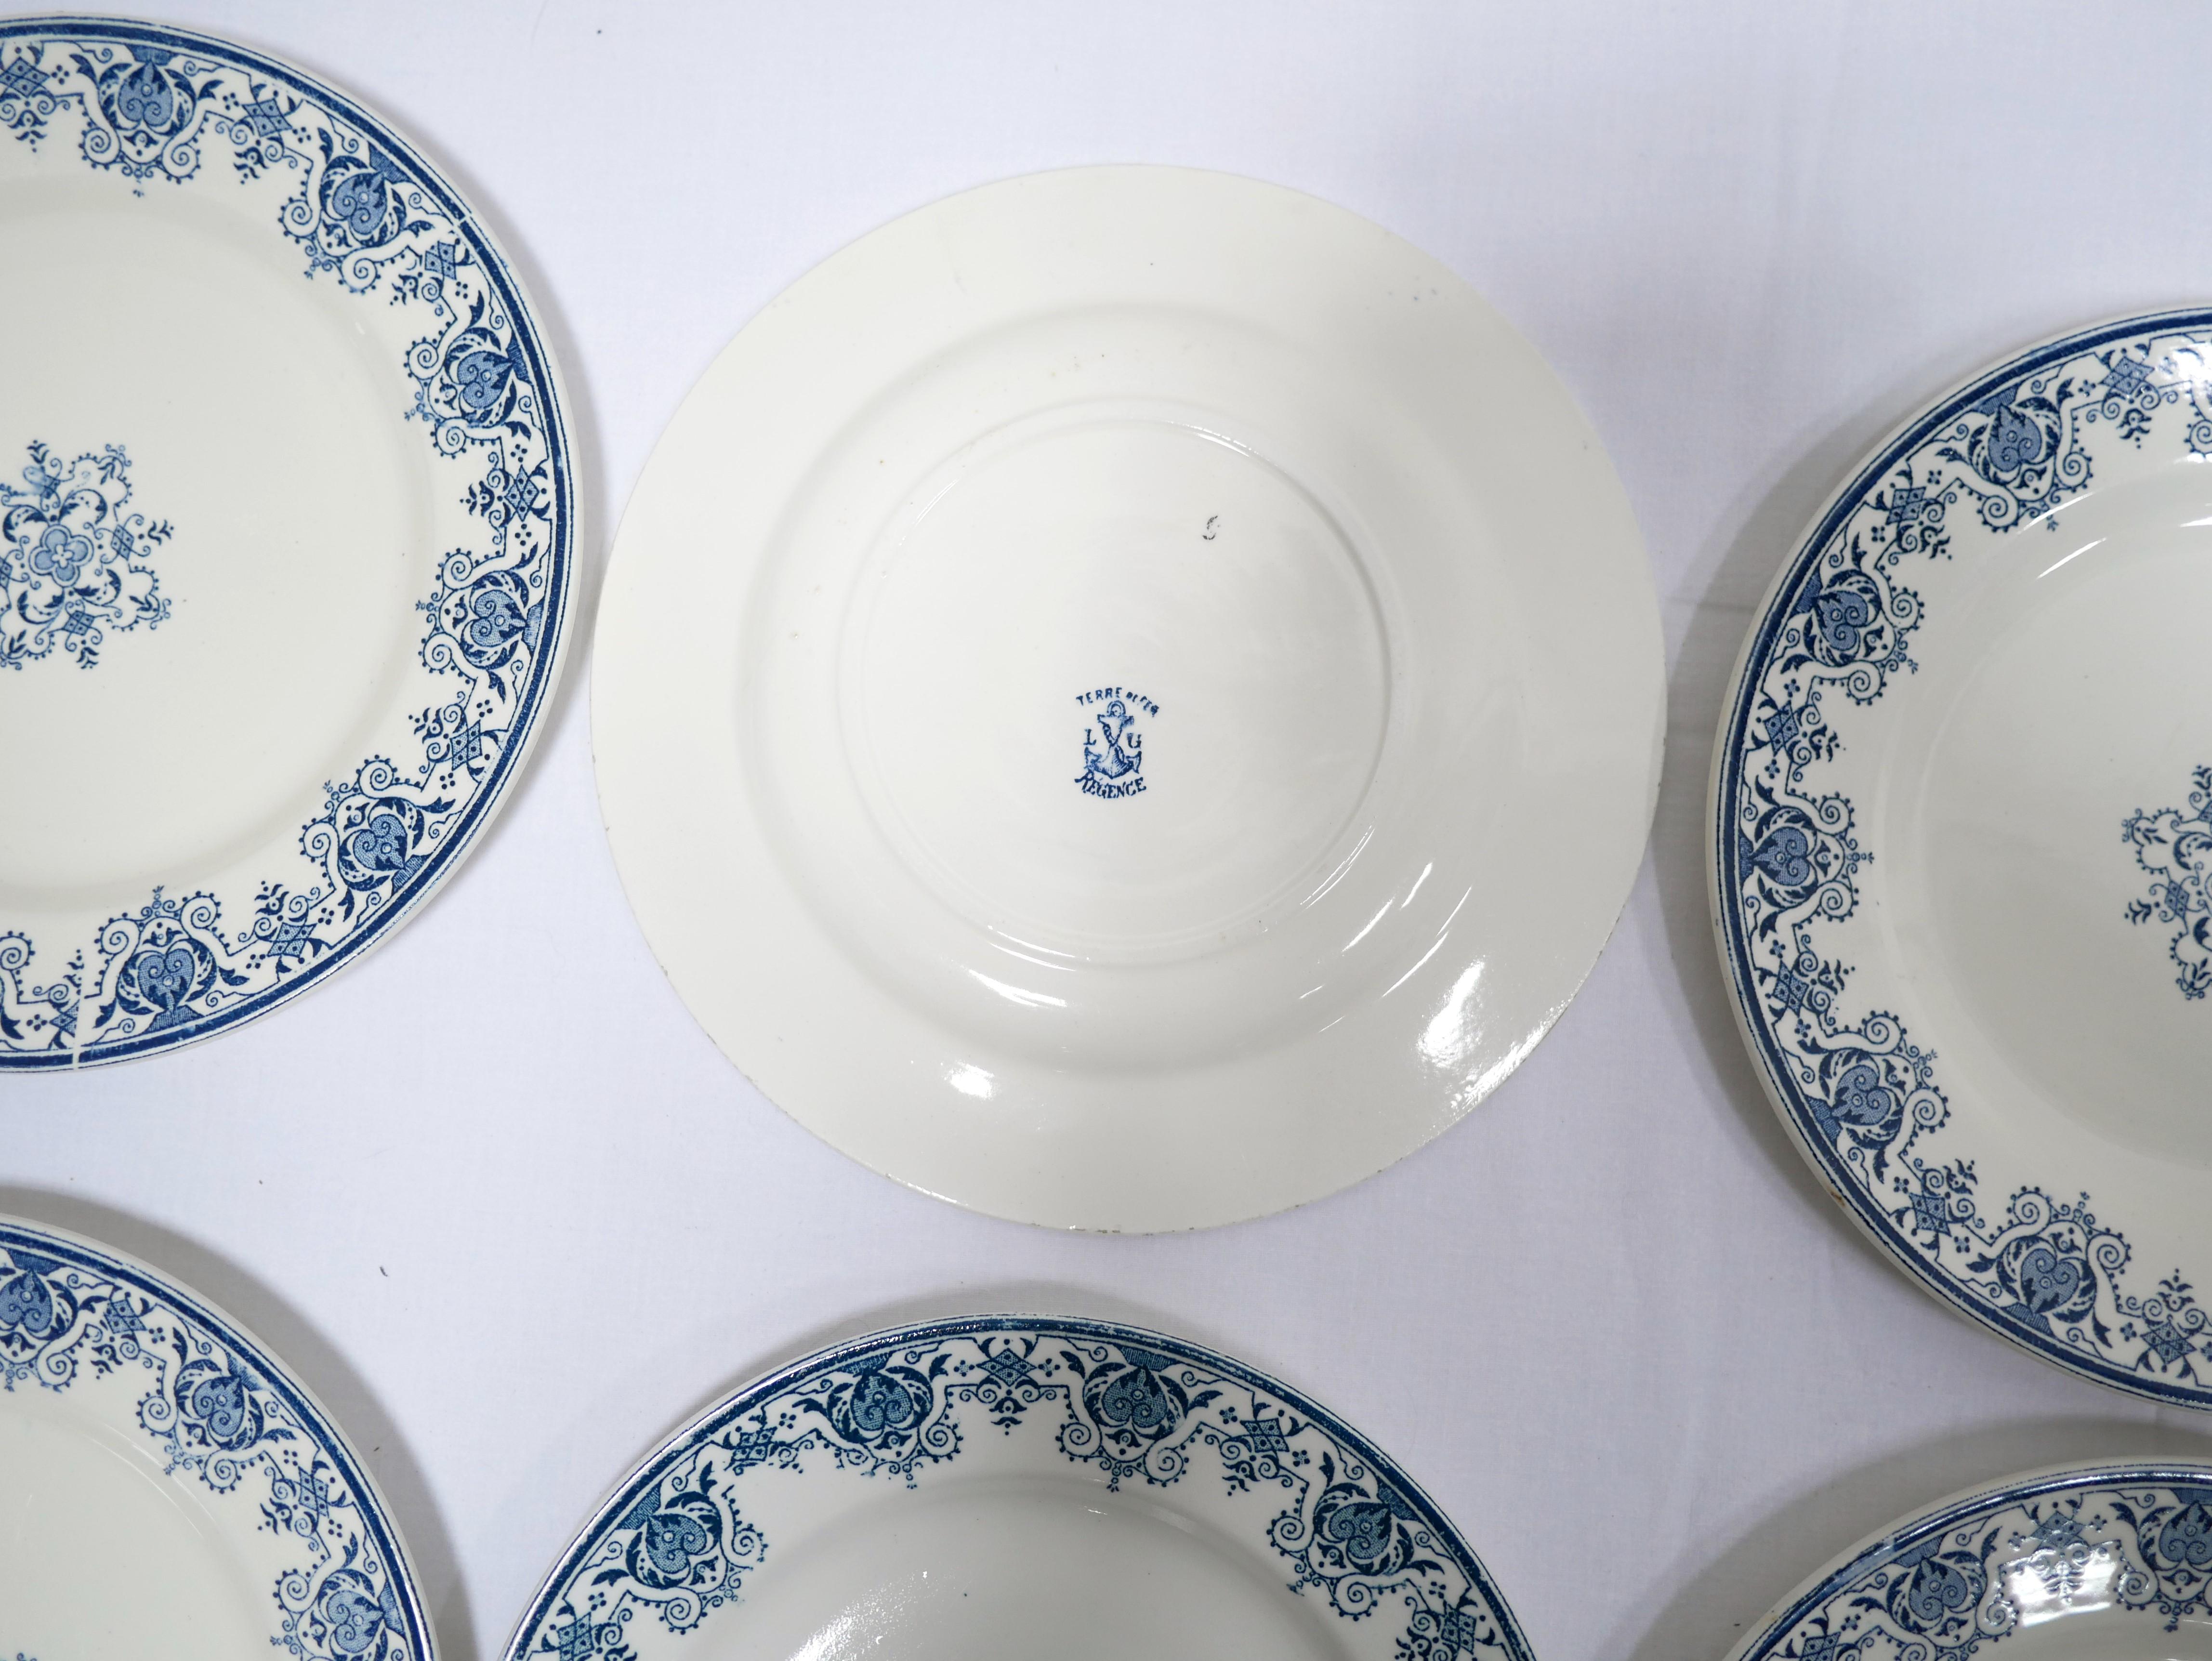 Series of 10 Old Terre De Fer Plates by L.G. for the Clairefontaine Earthenware For Sale 4